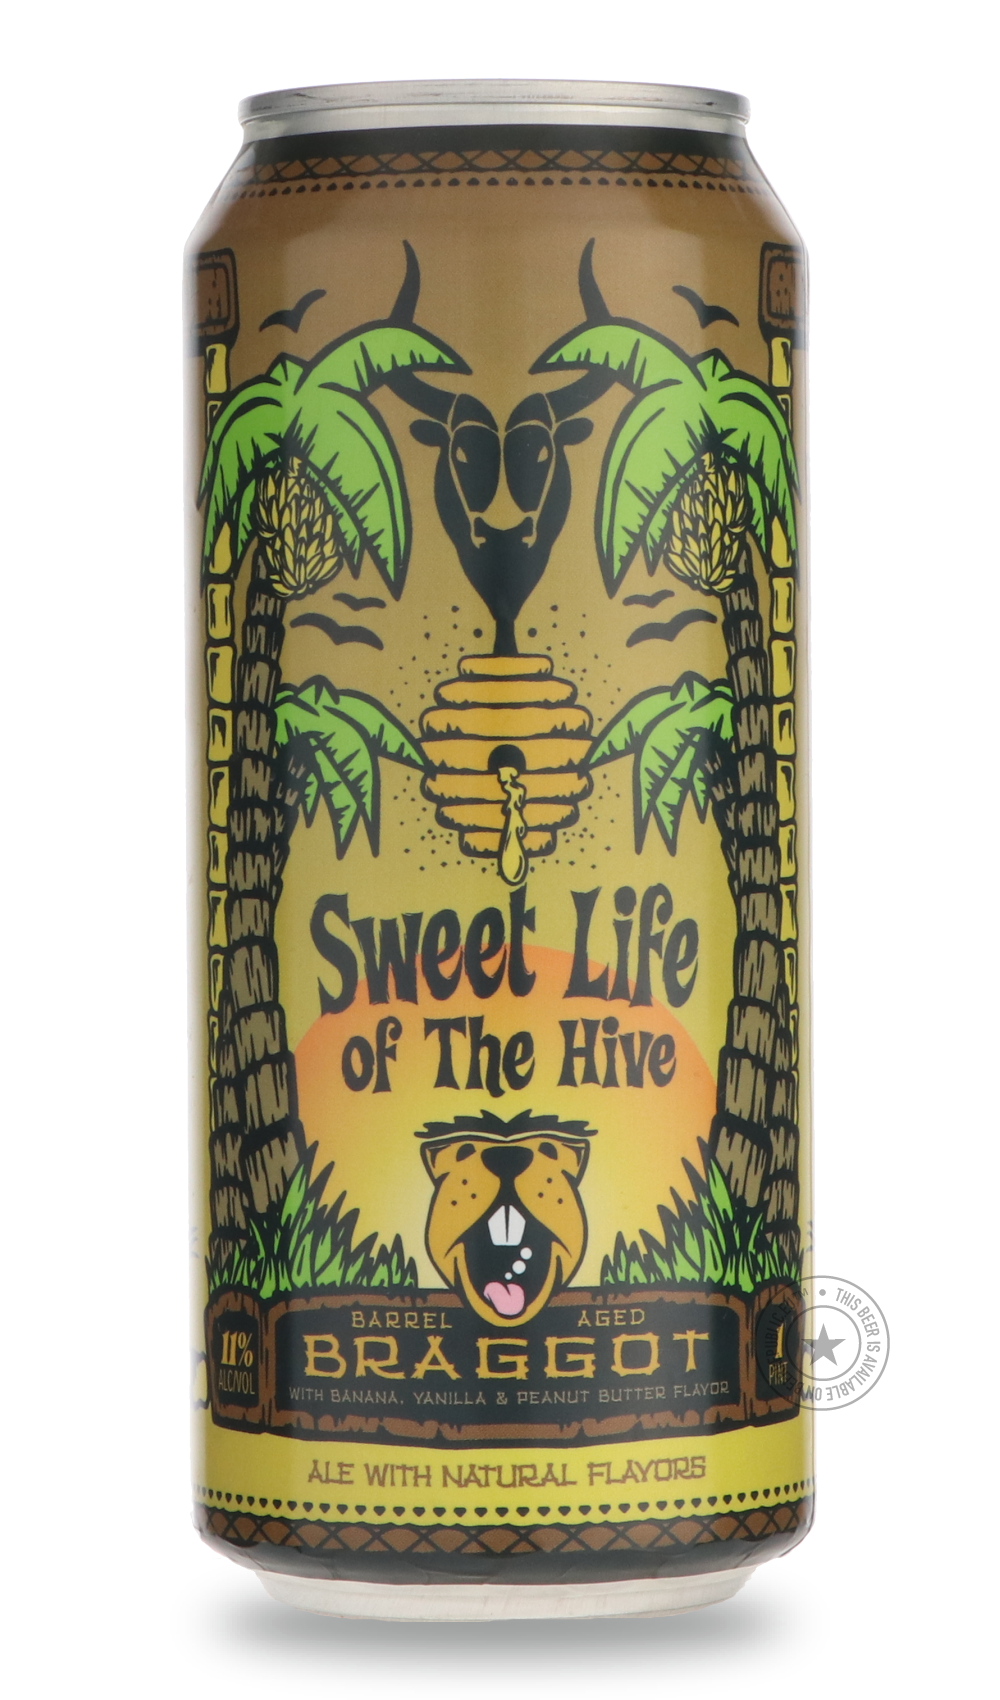 -Belching Beaver- Sweet Life of the Hive / Superstition-Specials- Only @ Beer Republic - The best online beer store for American & Canadian craft beer - Buy beer online from the USA and Canada - Bier online kopen - Amerikaans bier kopen - Craft beer store - Craft beer kopen - Amerikanisch bier kaufen - Bier online kaufen - Acheter biere online - IPA - Stout - Porter - New England IPA - Hazy IPA - Imperial Stout - Barrel Aged - Barrel Aged Imperial Stout - Brown - Dark beer - Blond - Blonde - Pilsner - Lager